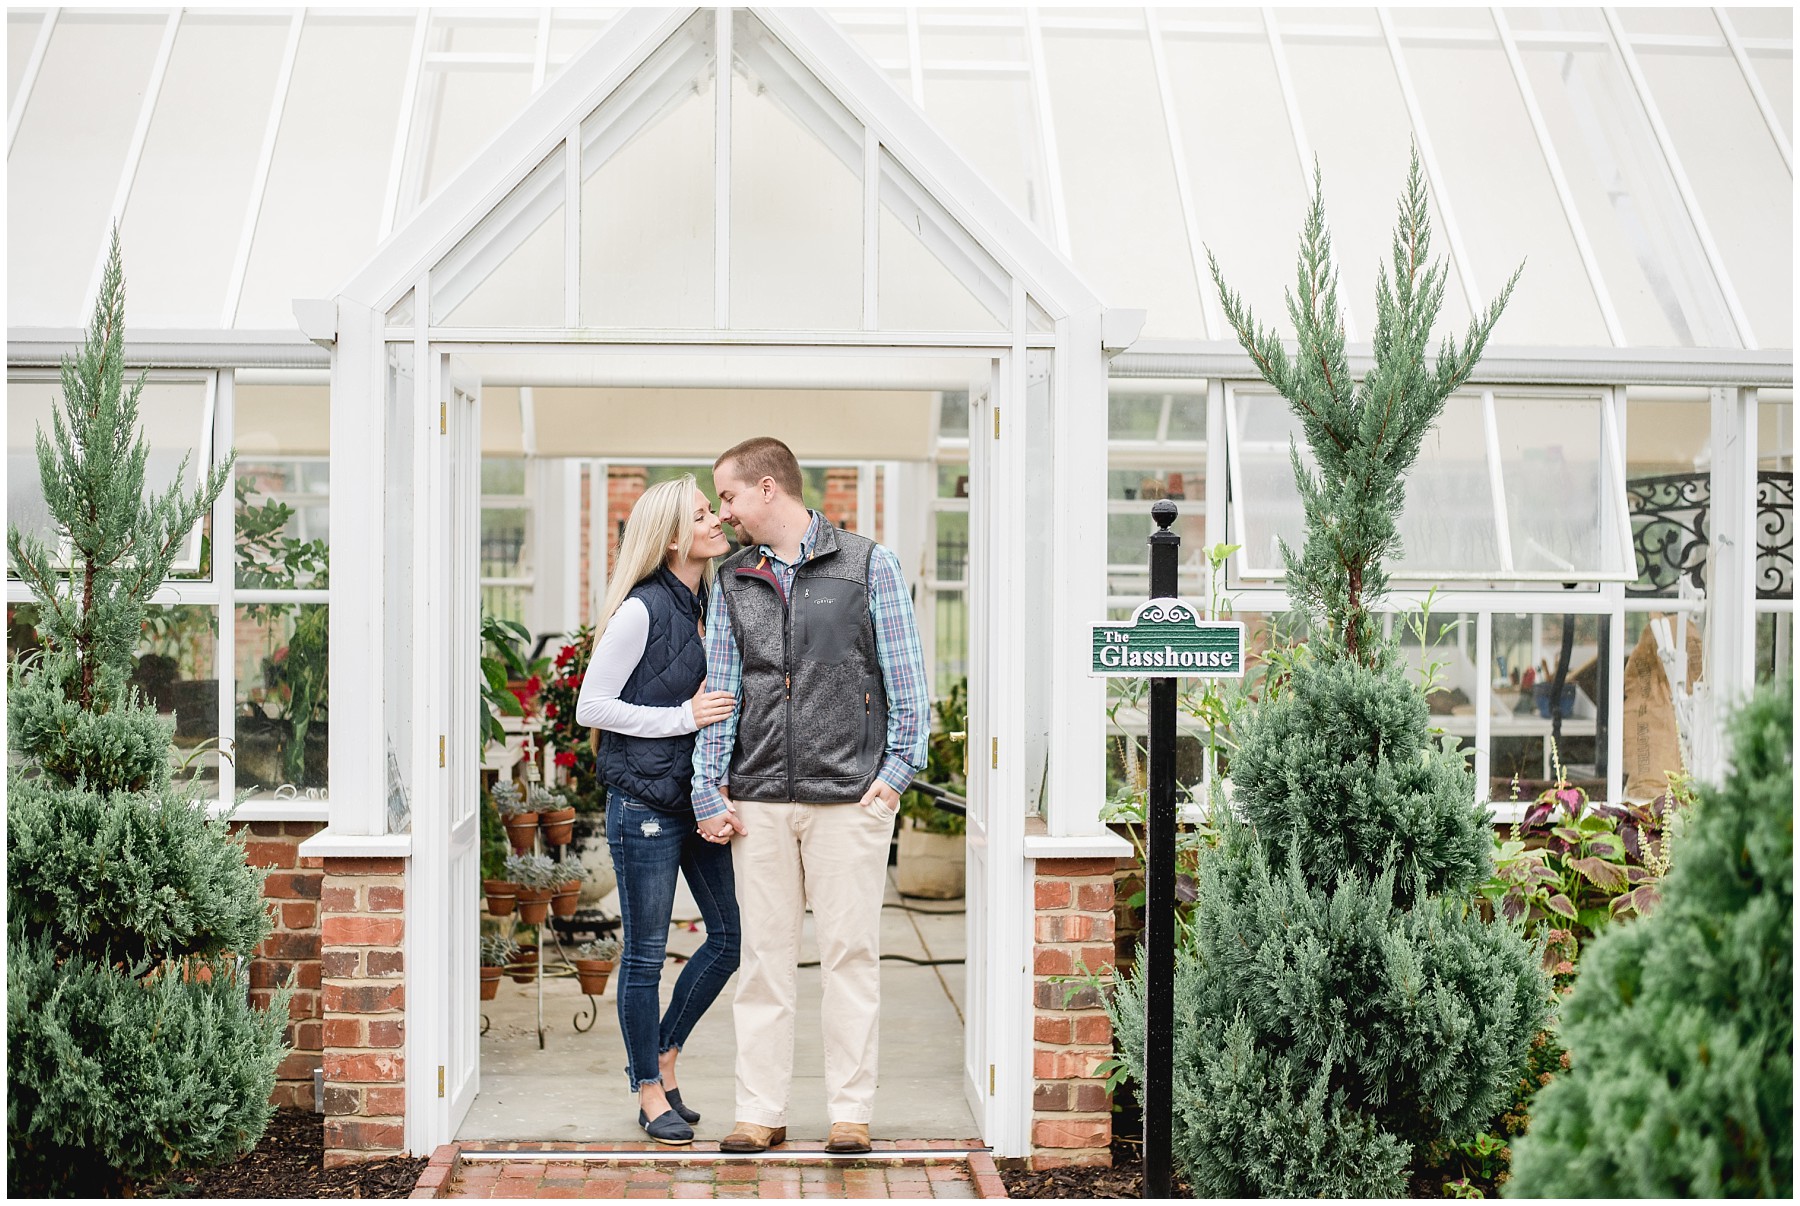 Intimate, Greenhouse, Engagement, Couples